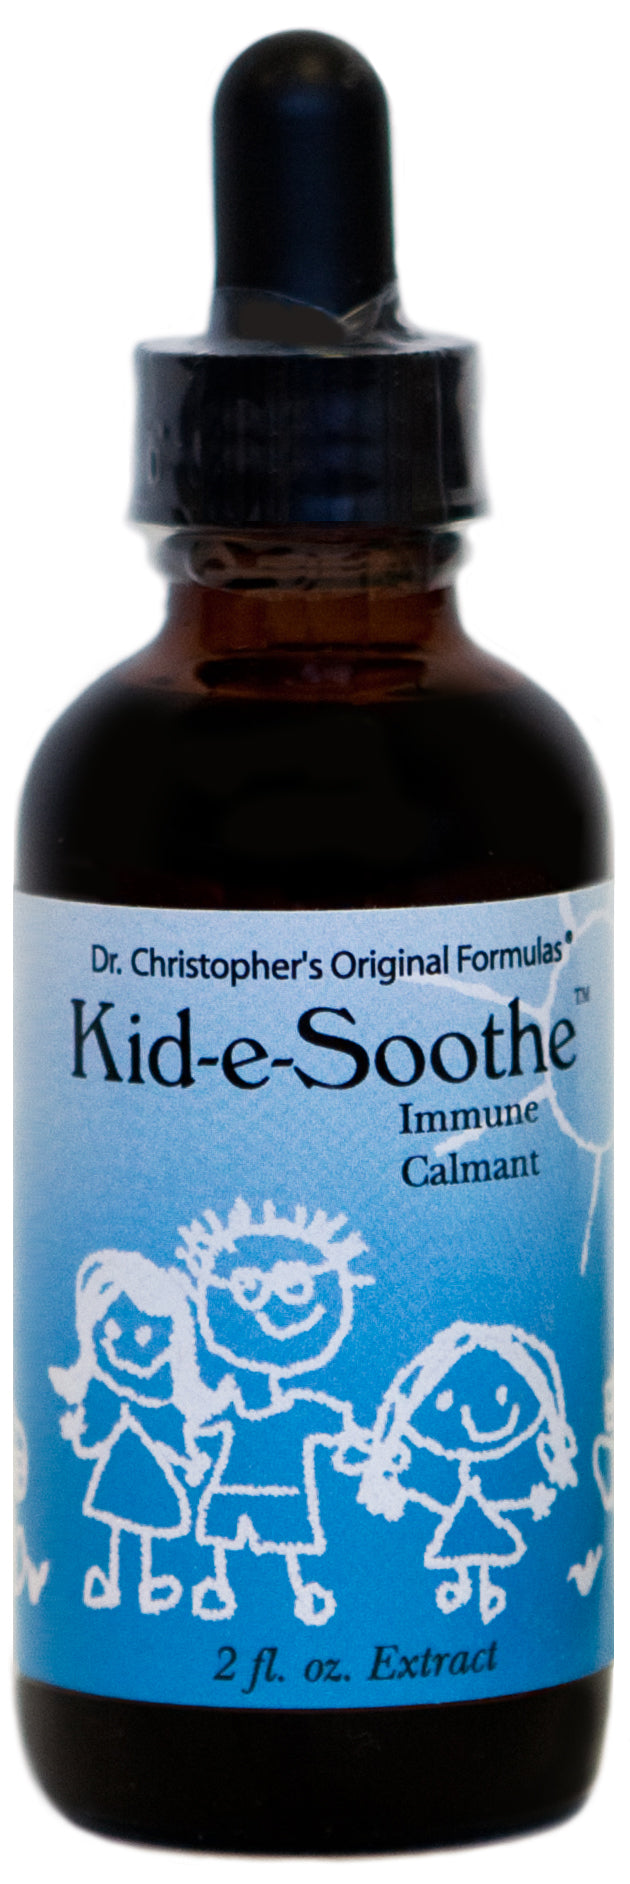 Dr. Christopher's Kid-e-Soothe Extract